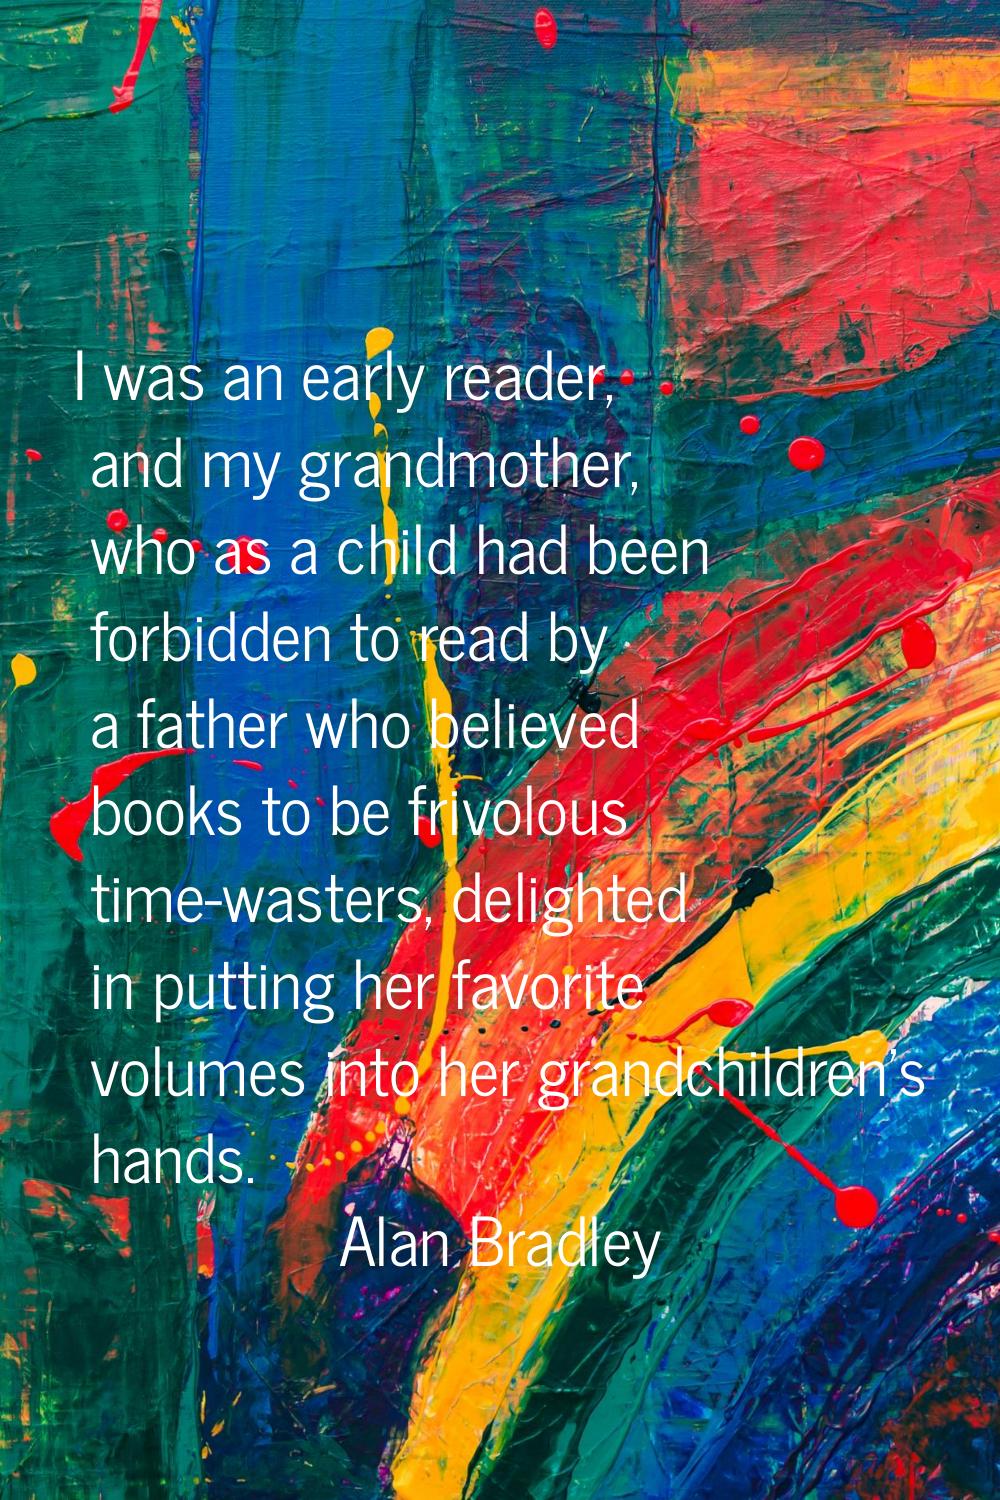 I was an early reader, and my grandmother, who as a child had been forbidden to read by a father wh